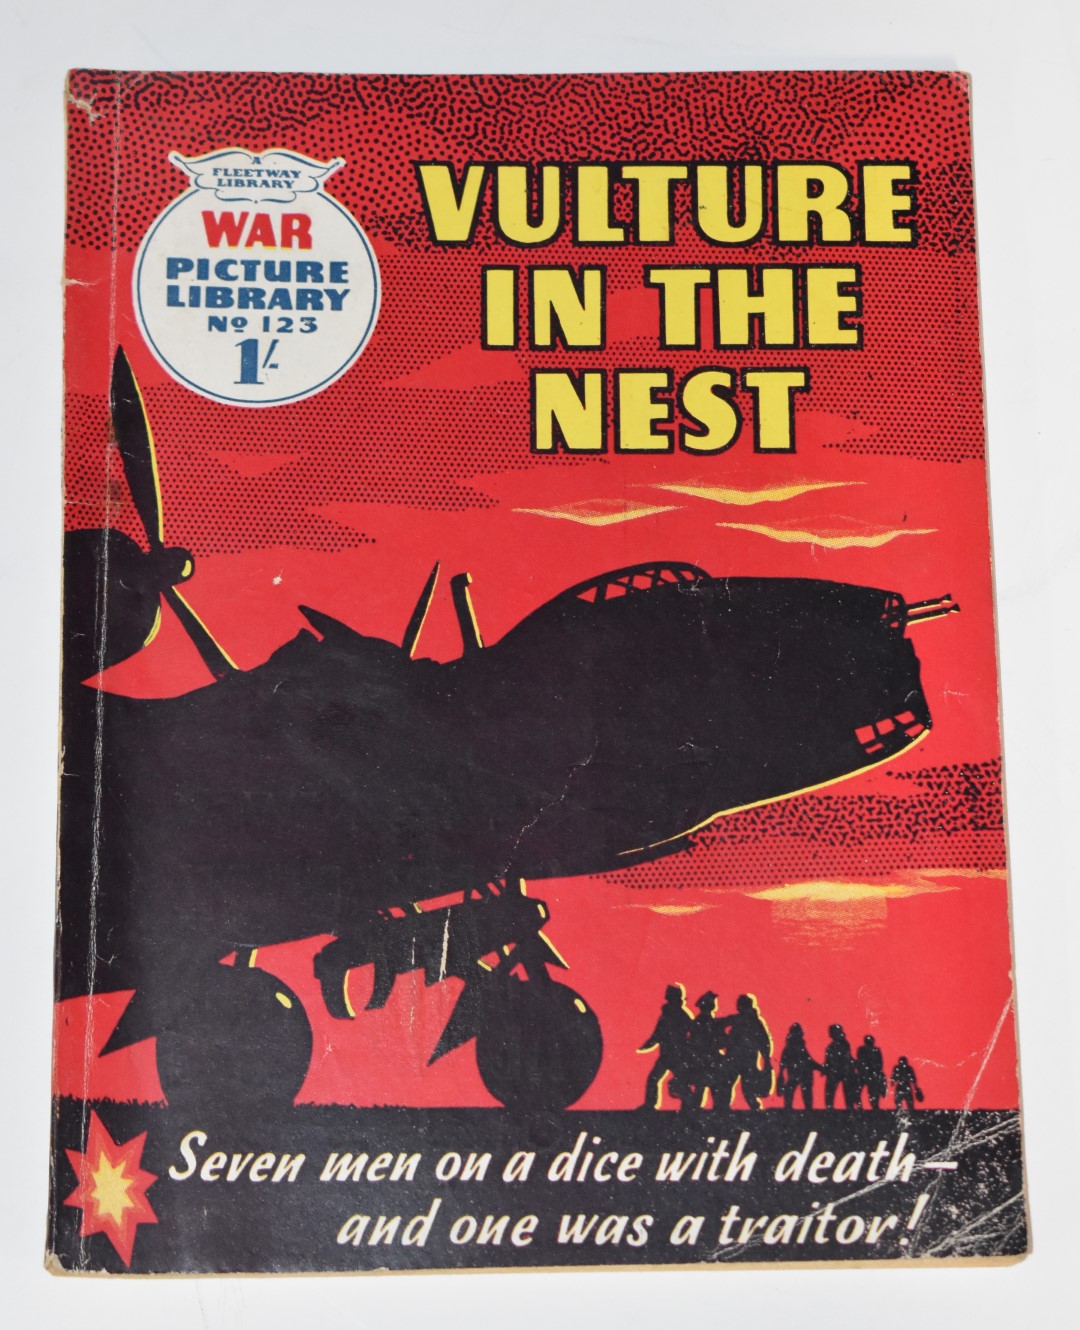 Ninety-Five War Picture Library comic books by Fleetway Publications - Image 5 of 8